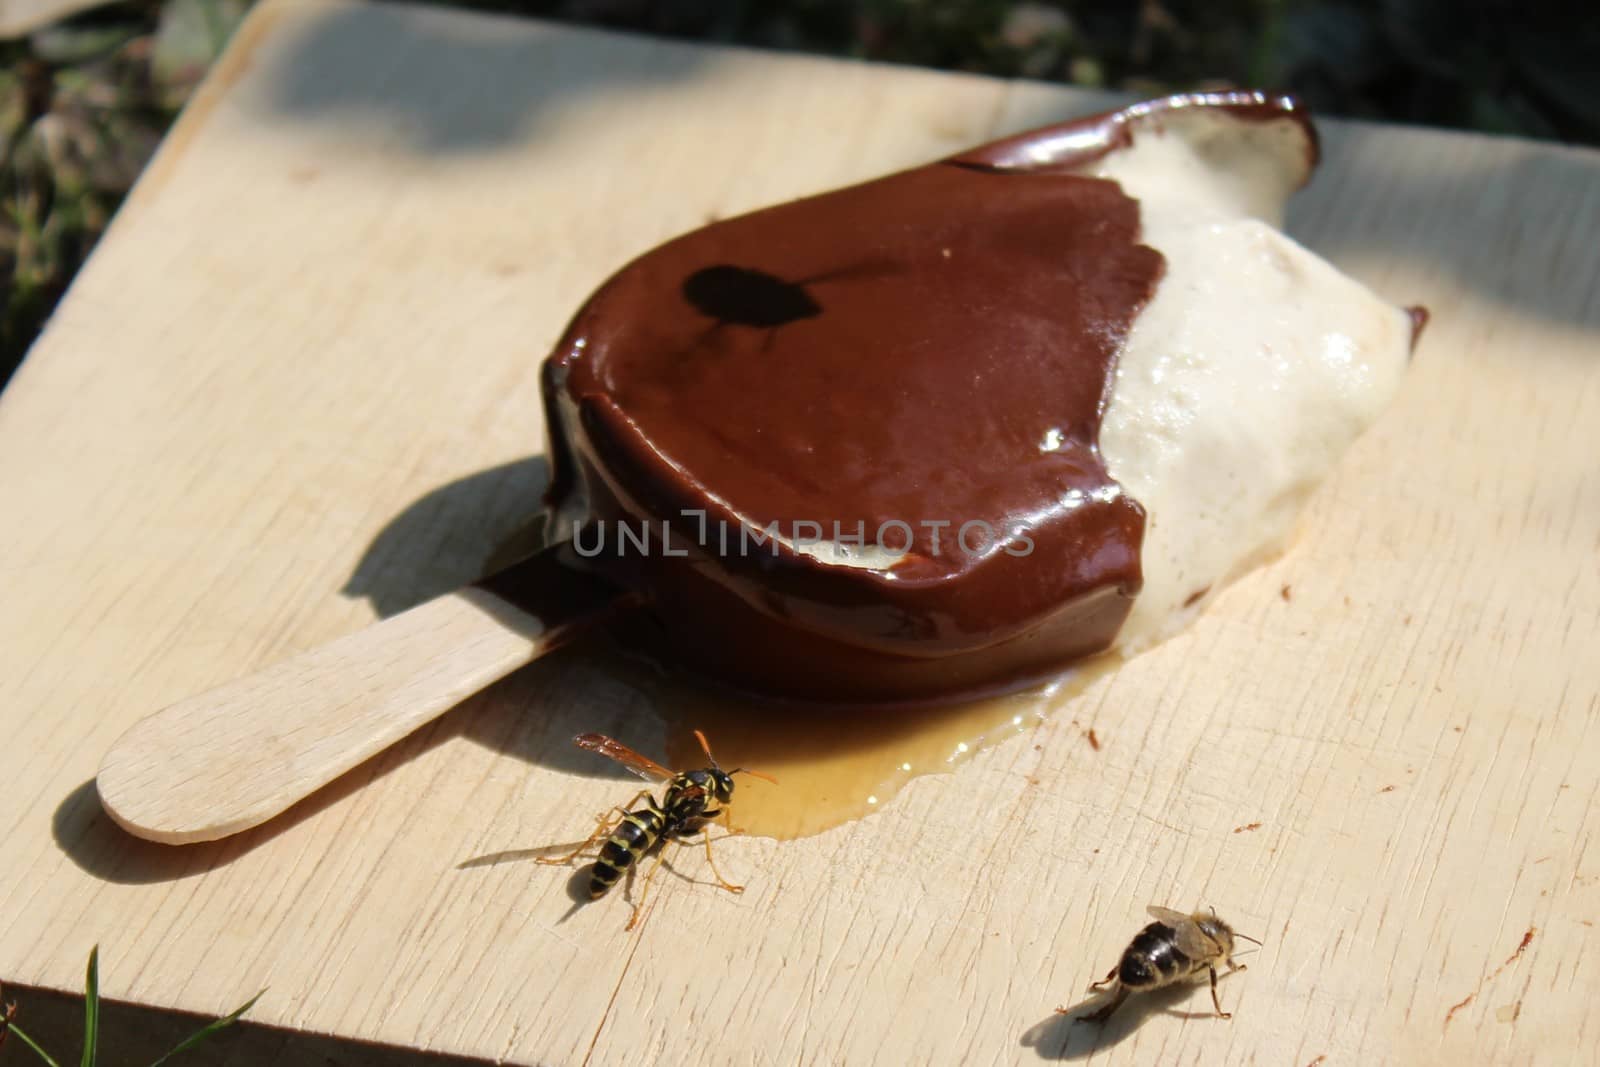 The picture shows ice cream and insects in the summer.